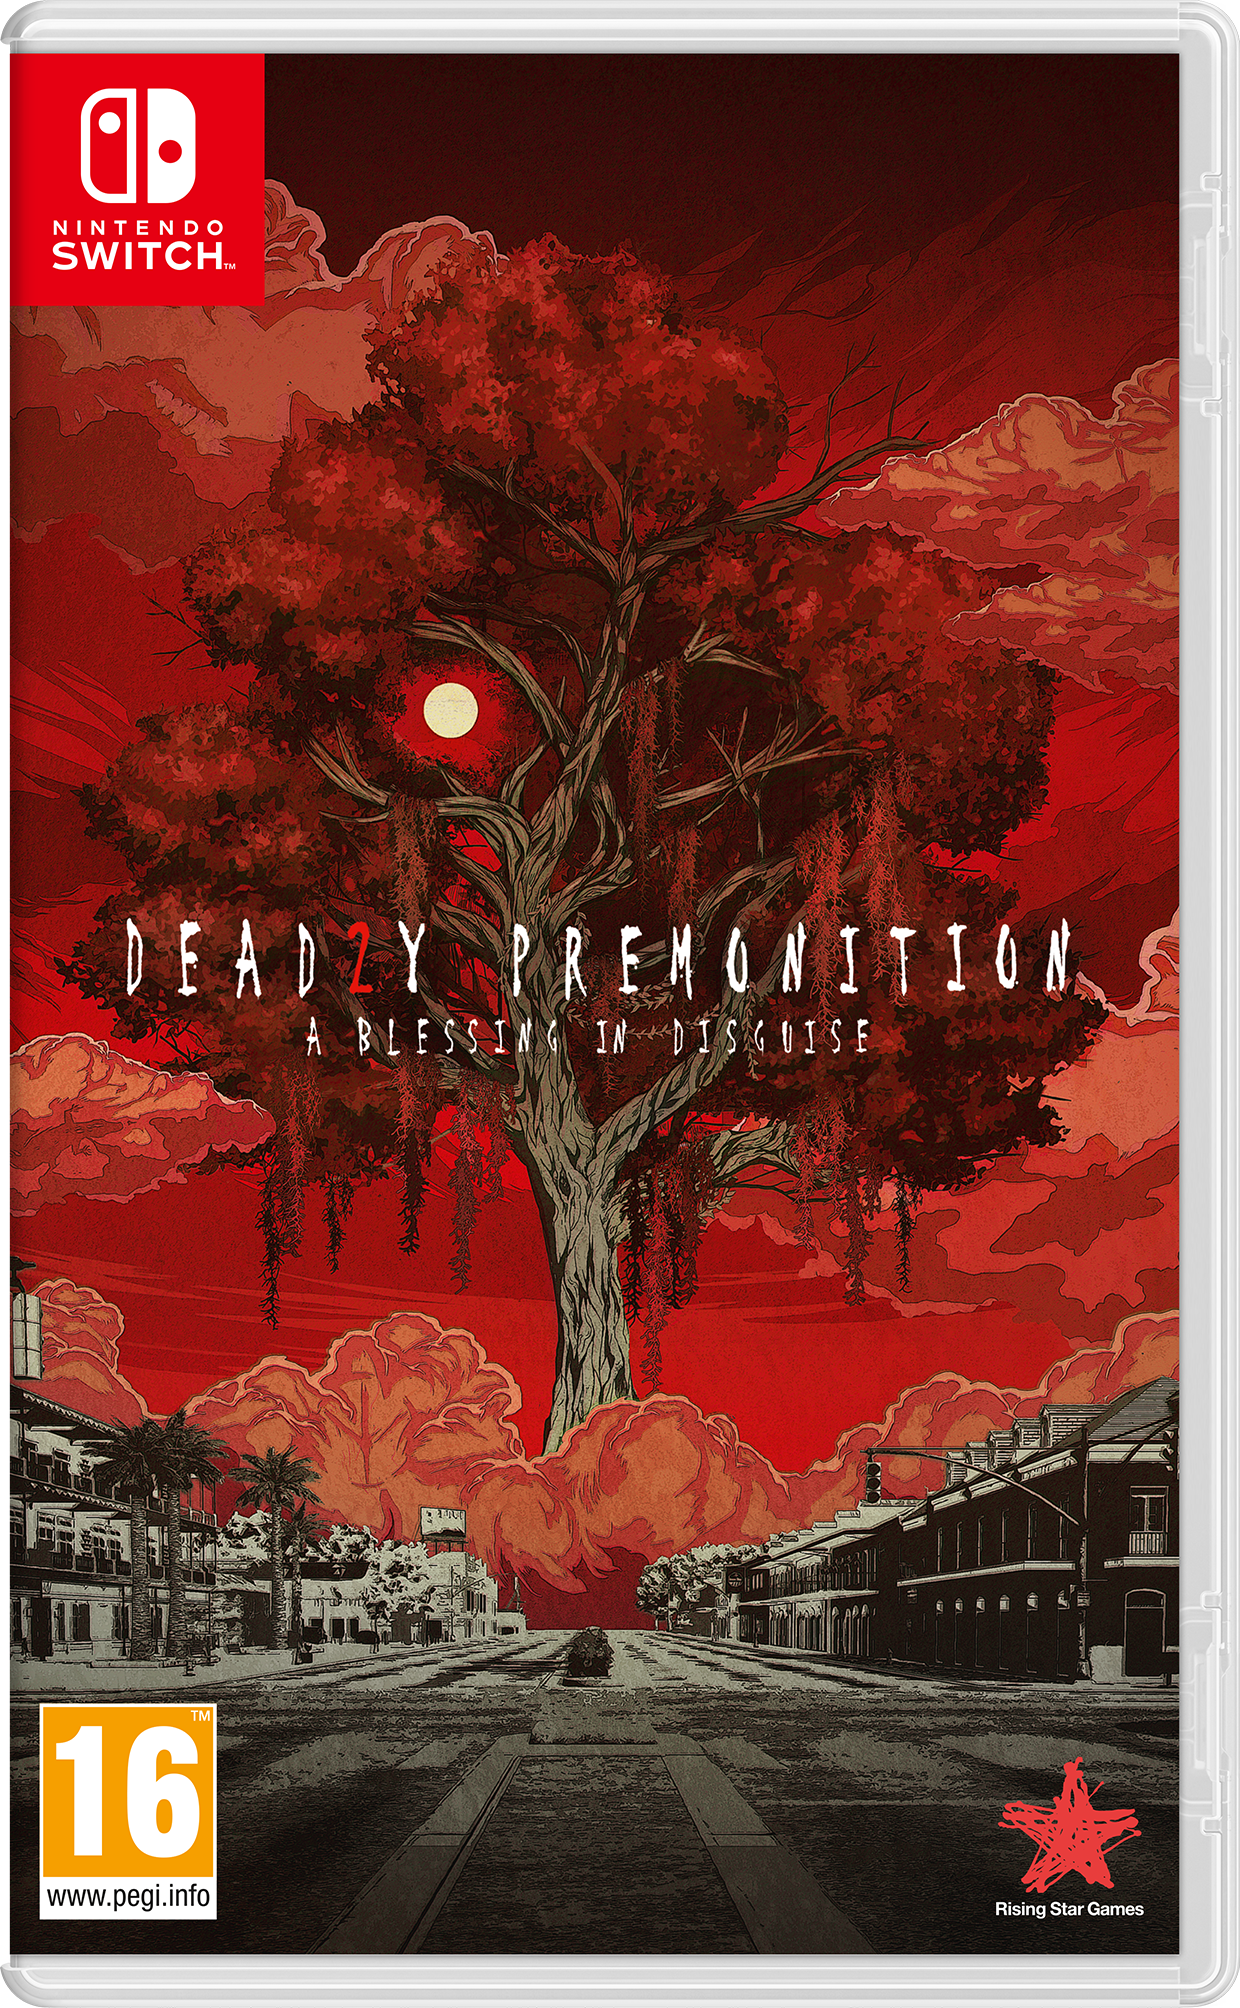 free download deadly premonition 2 a blessing in disguise nintendo switch